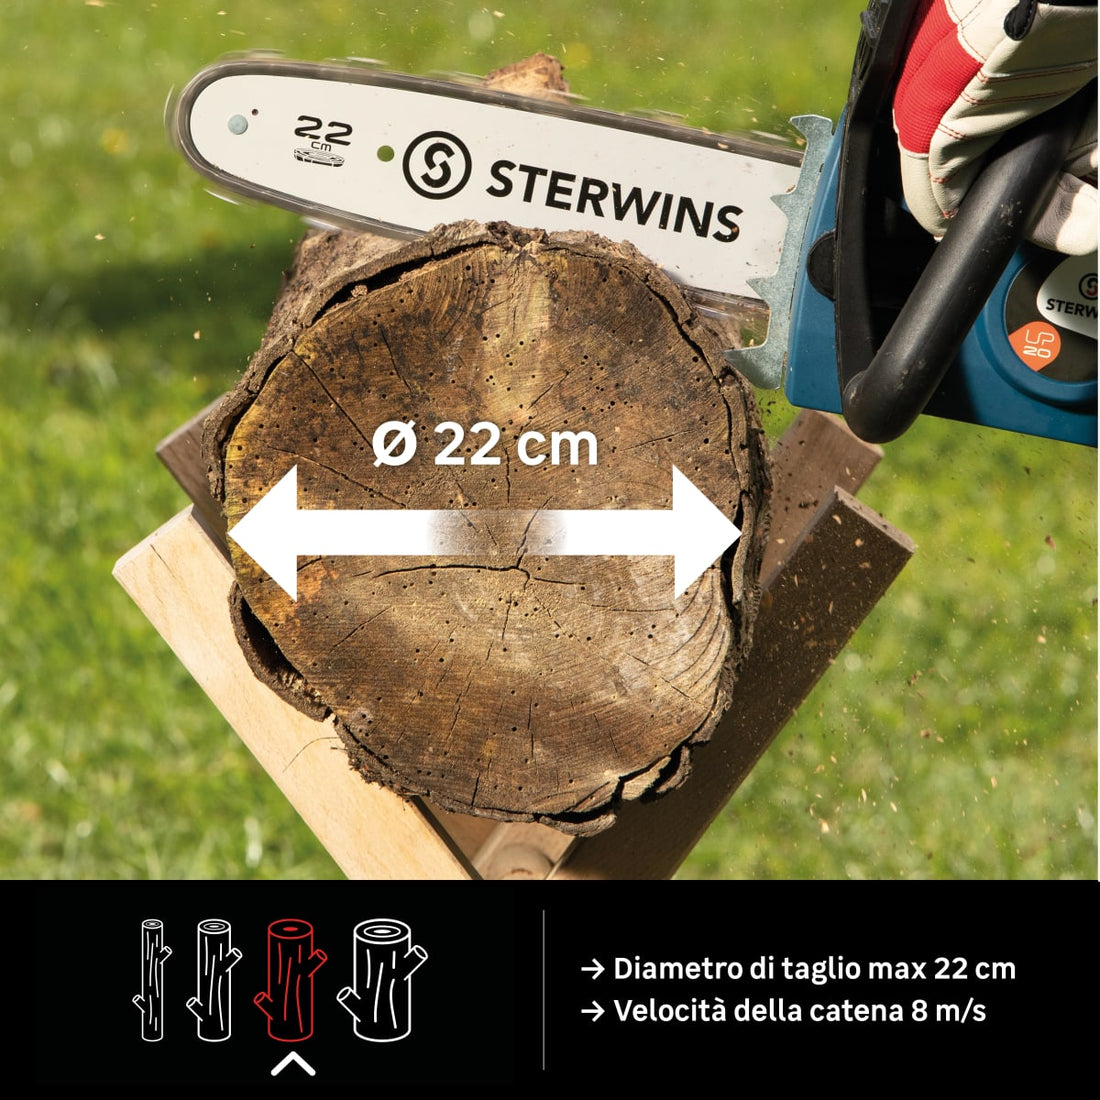 UP 20 STERWINS BATTERY-POWERED CHAINSAW CUTTING LENGTH 22 CM